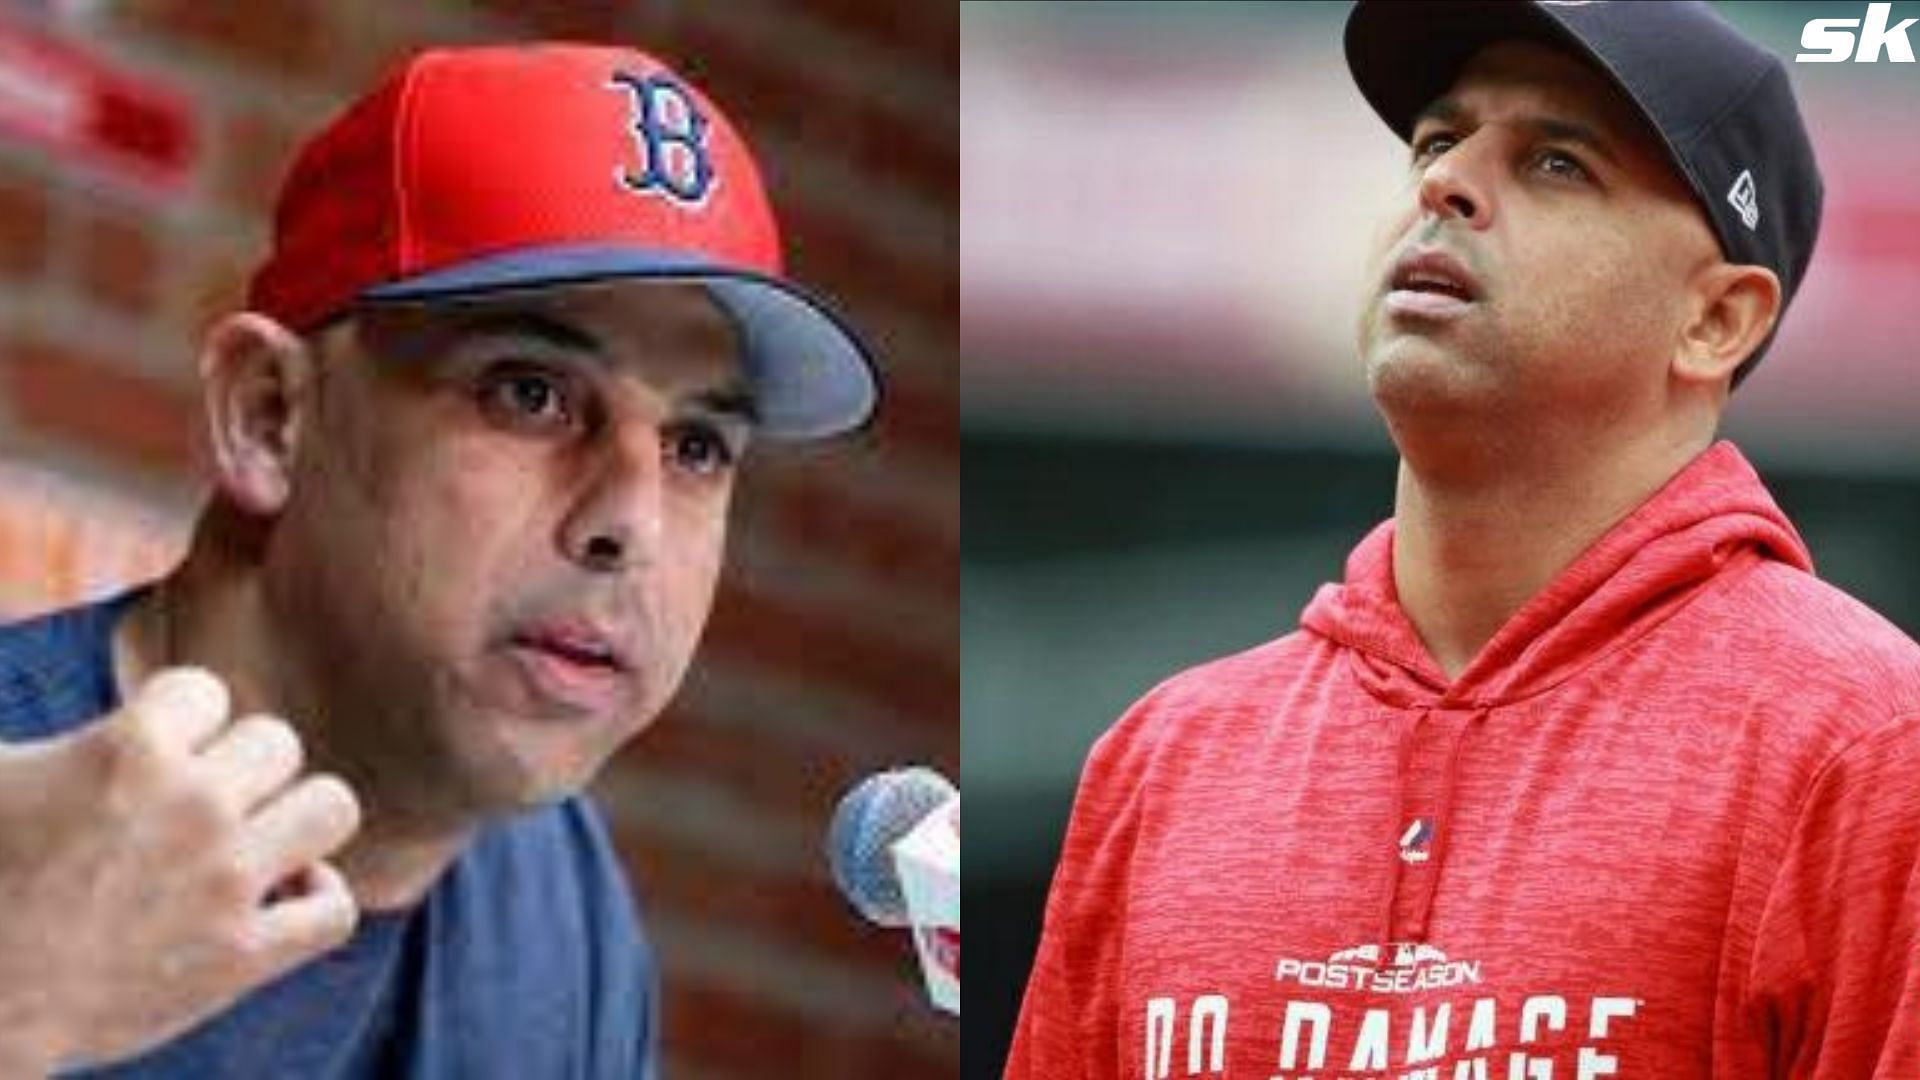 Alex Cora once made a shocking confession about Houston Astros stealing 2017 World Series title in intoxicated condition